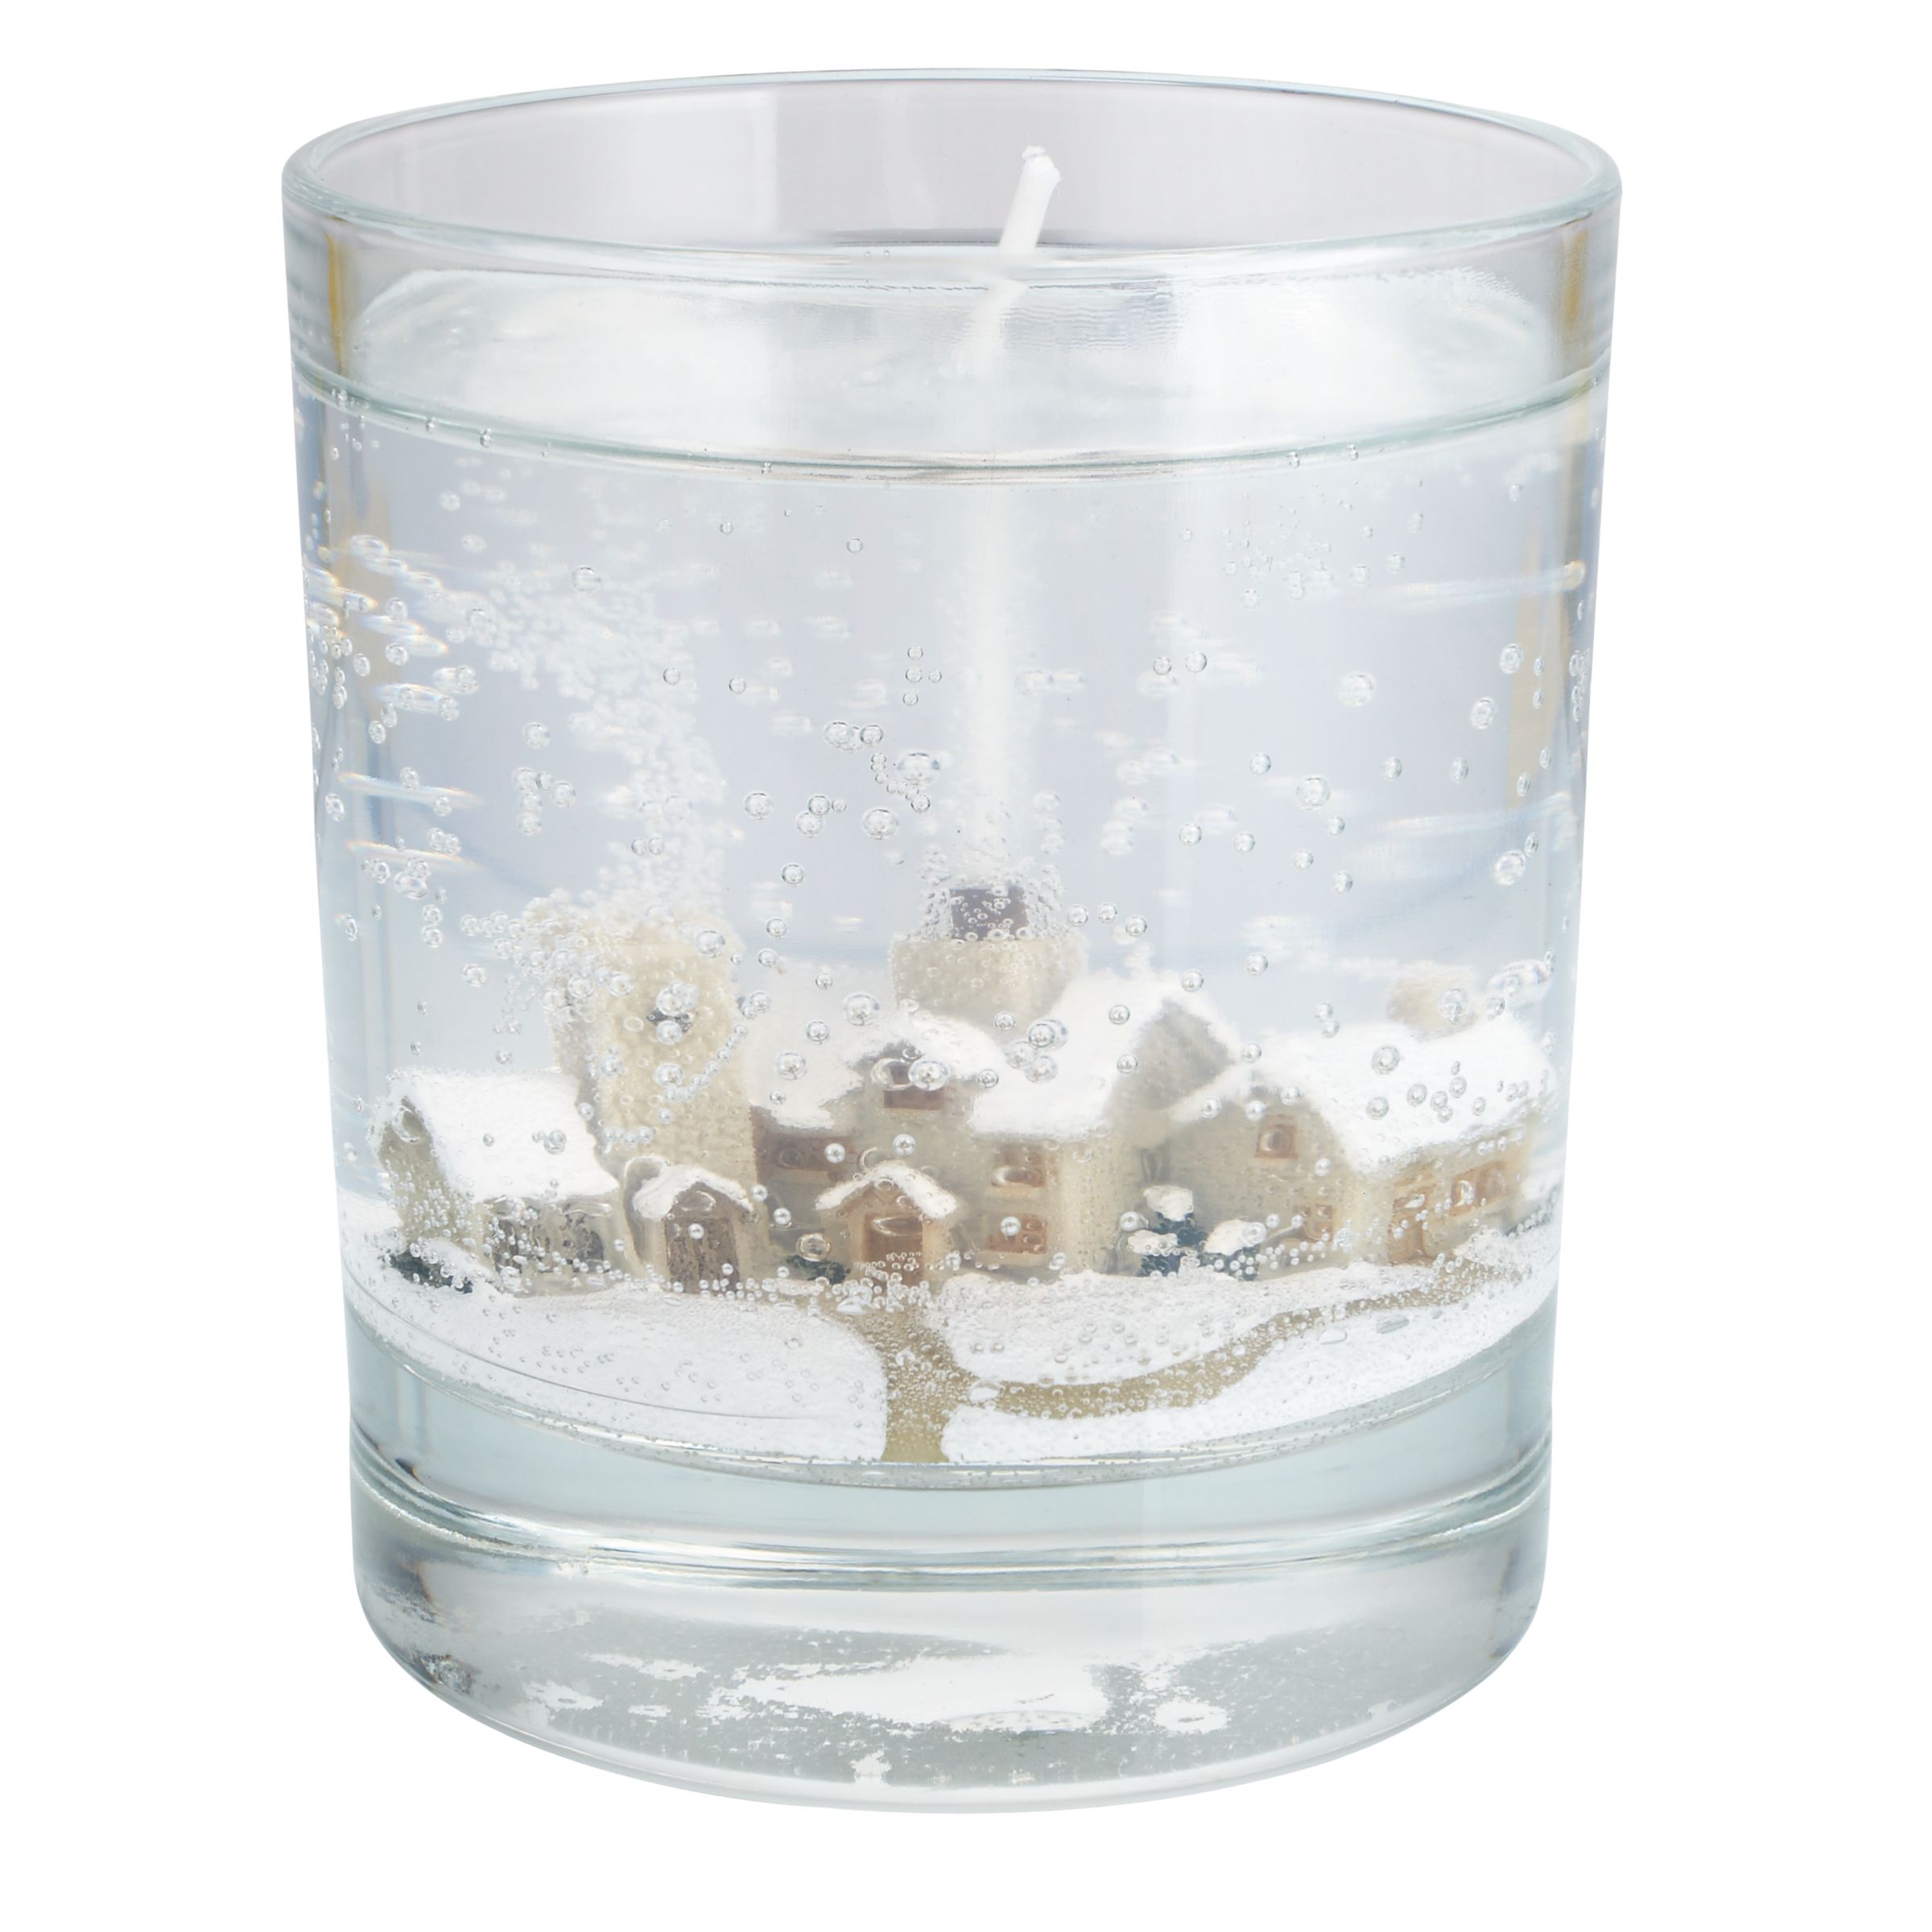 Winter Holiday Pine Gel Candle -   Gel candles, Candles, Gel wax  candles